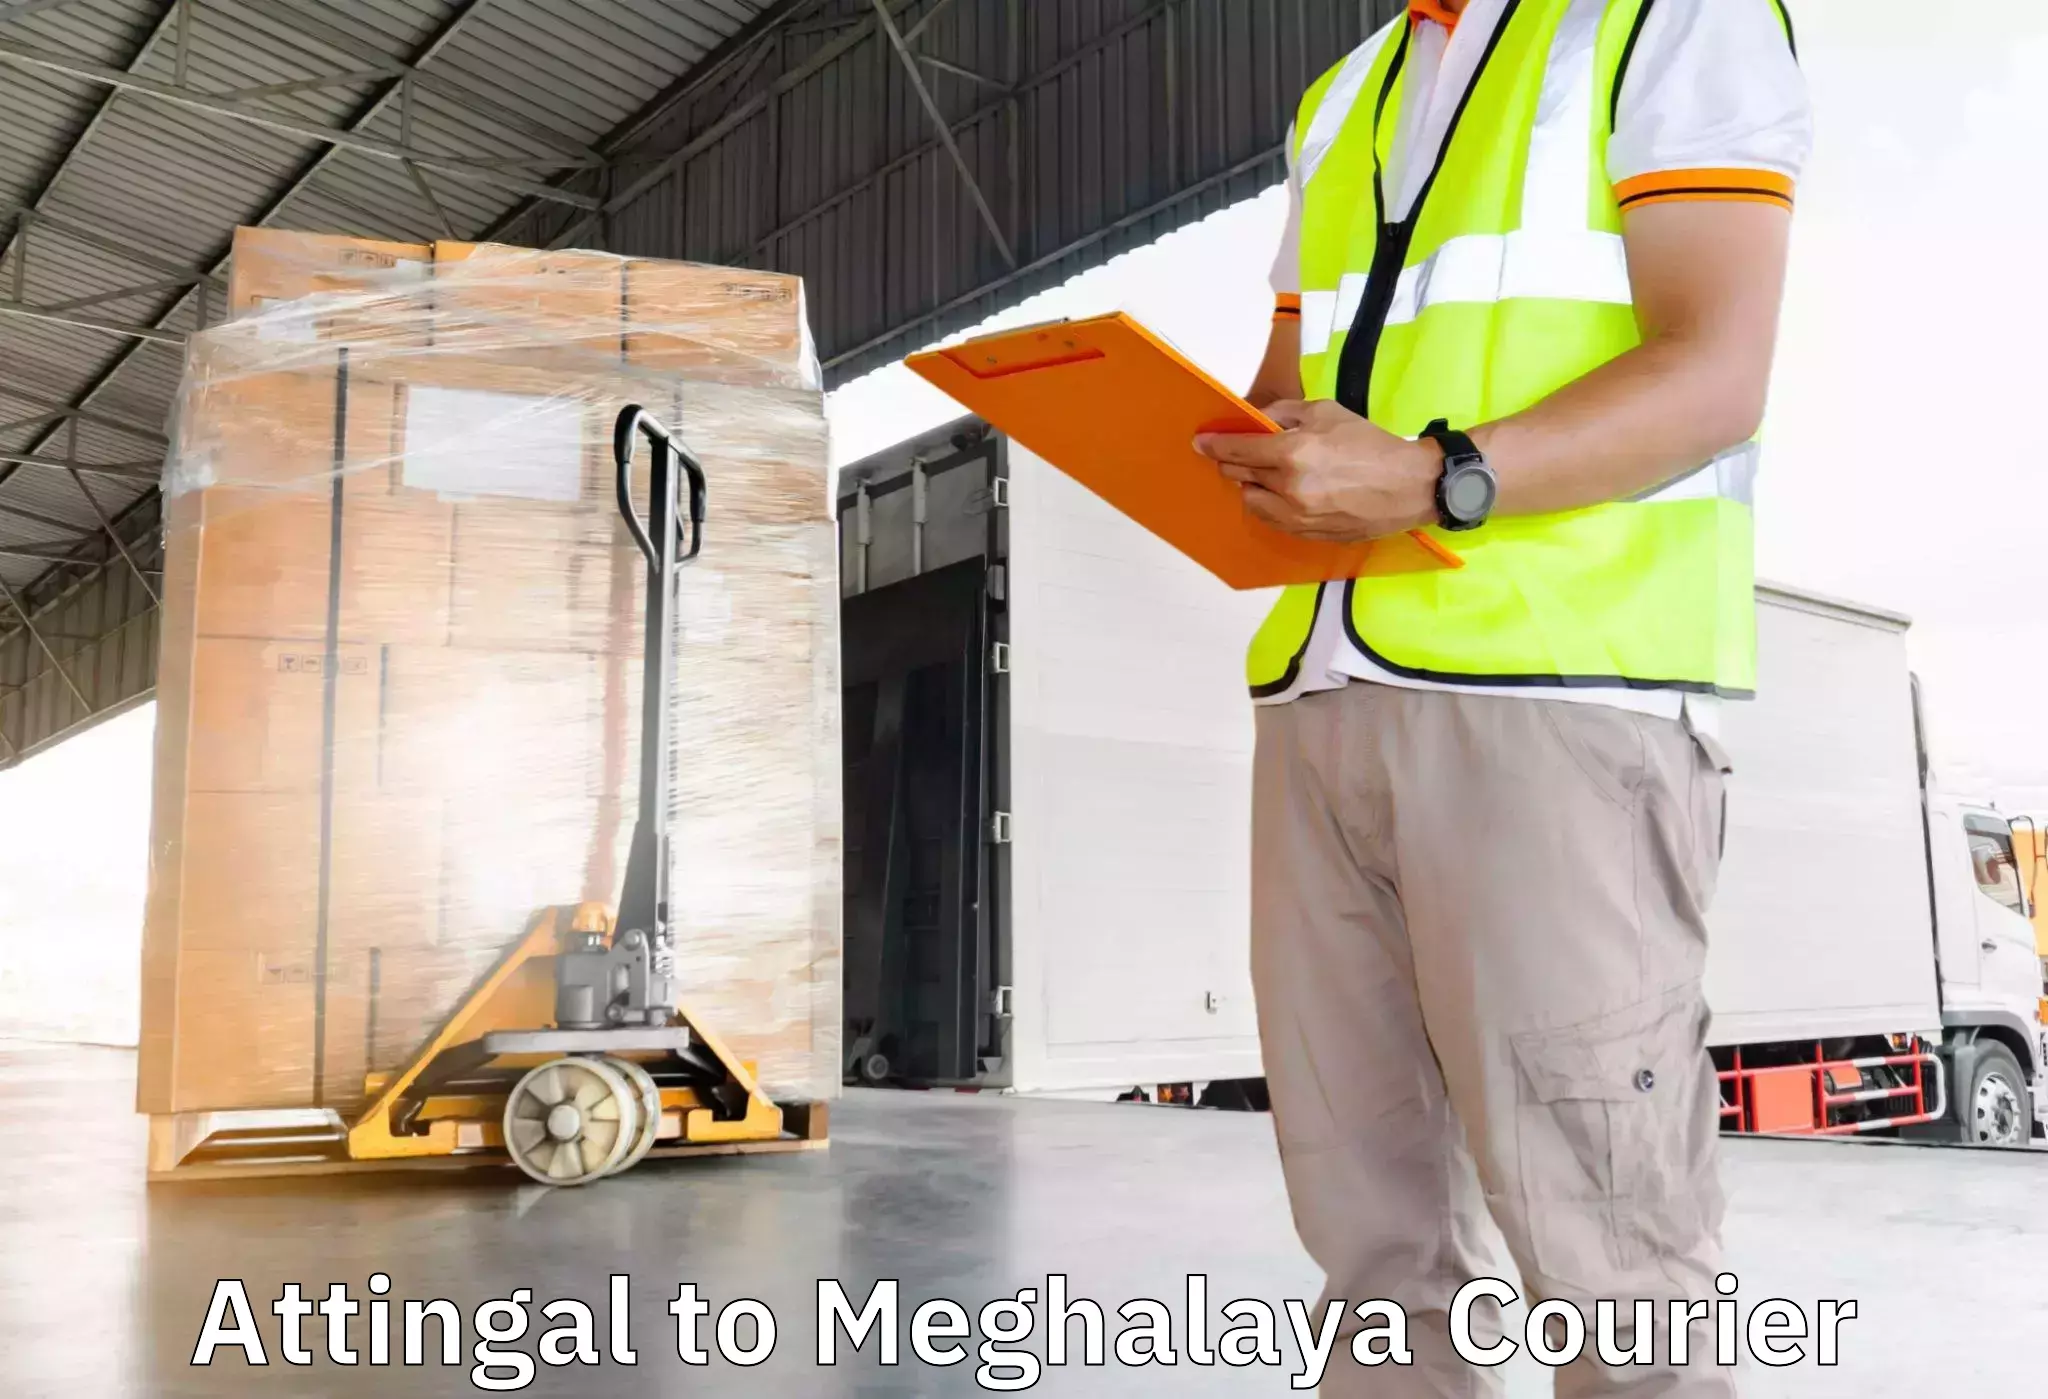 Reliable relocation services in Attingal to Shillong